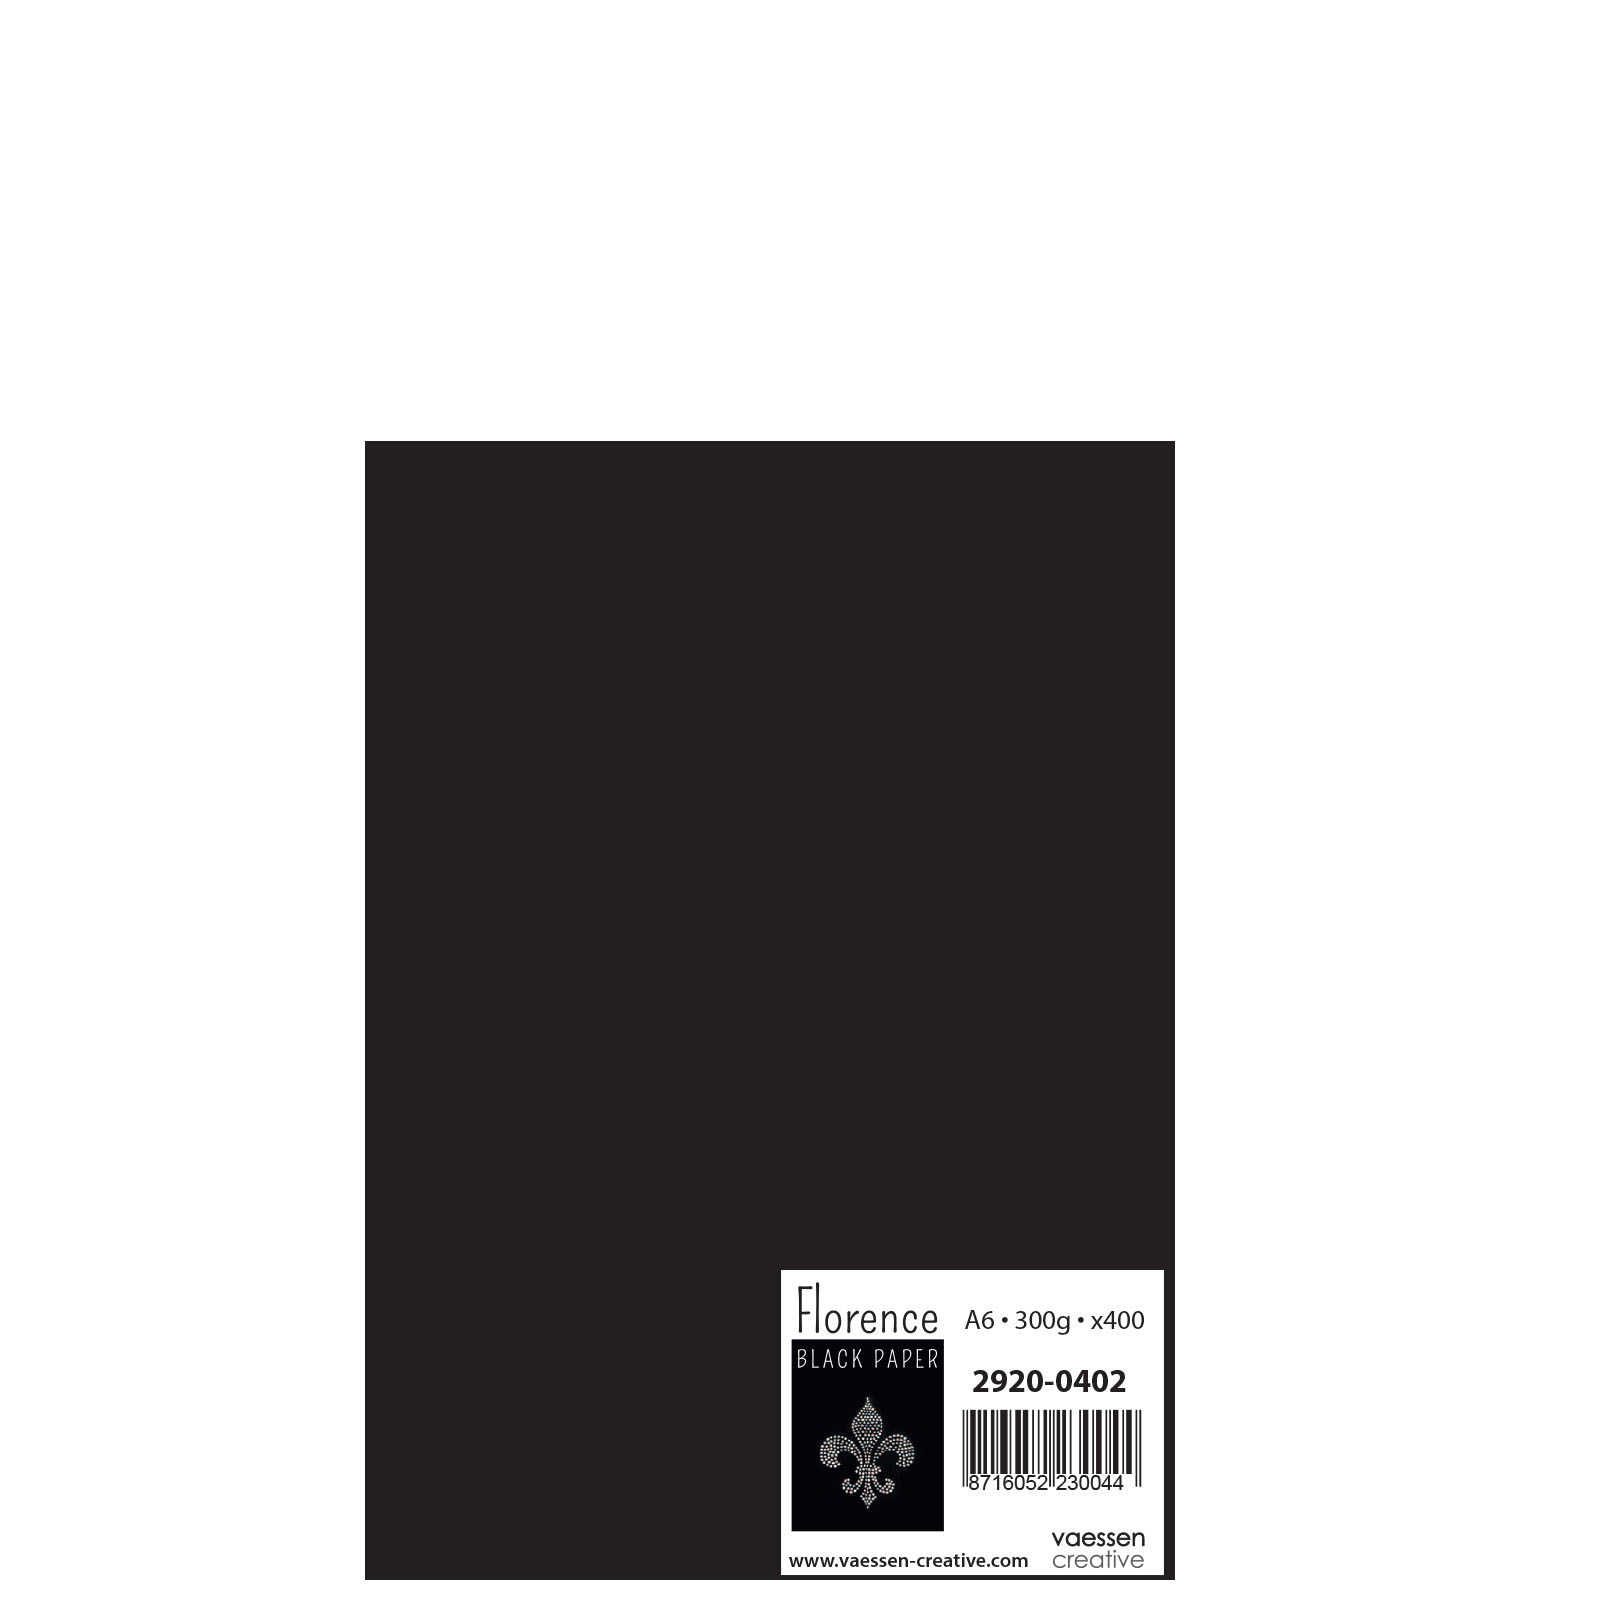 Florence • Cardstock Paper Smooth A6 300g Black 400pcs